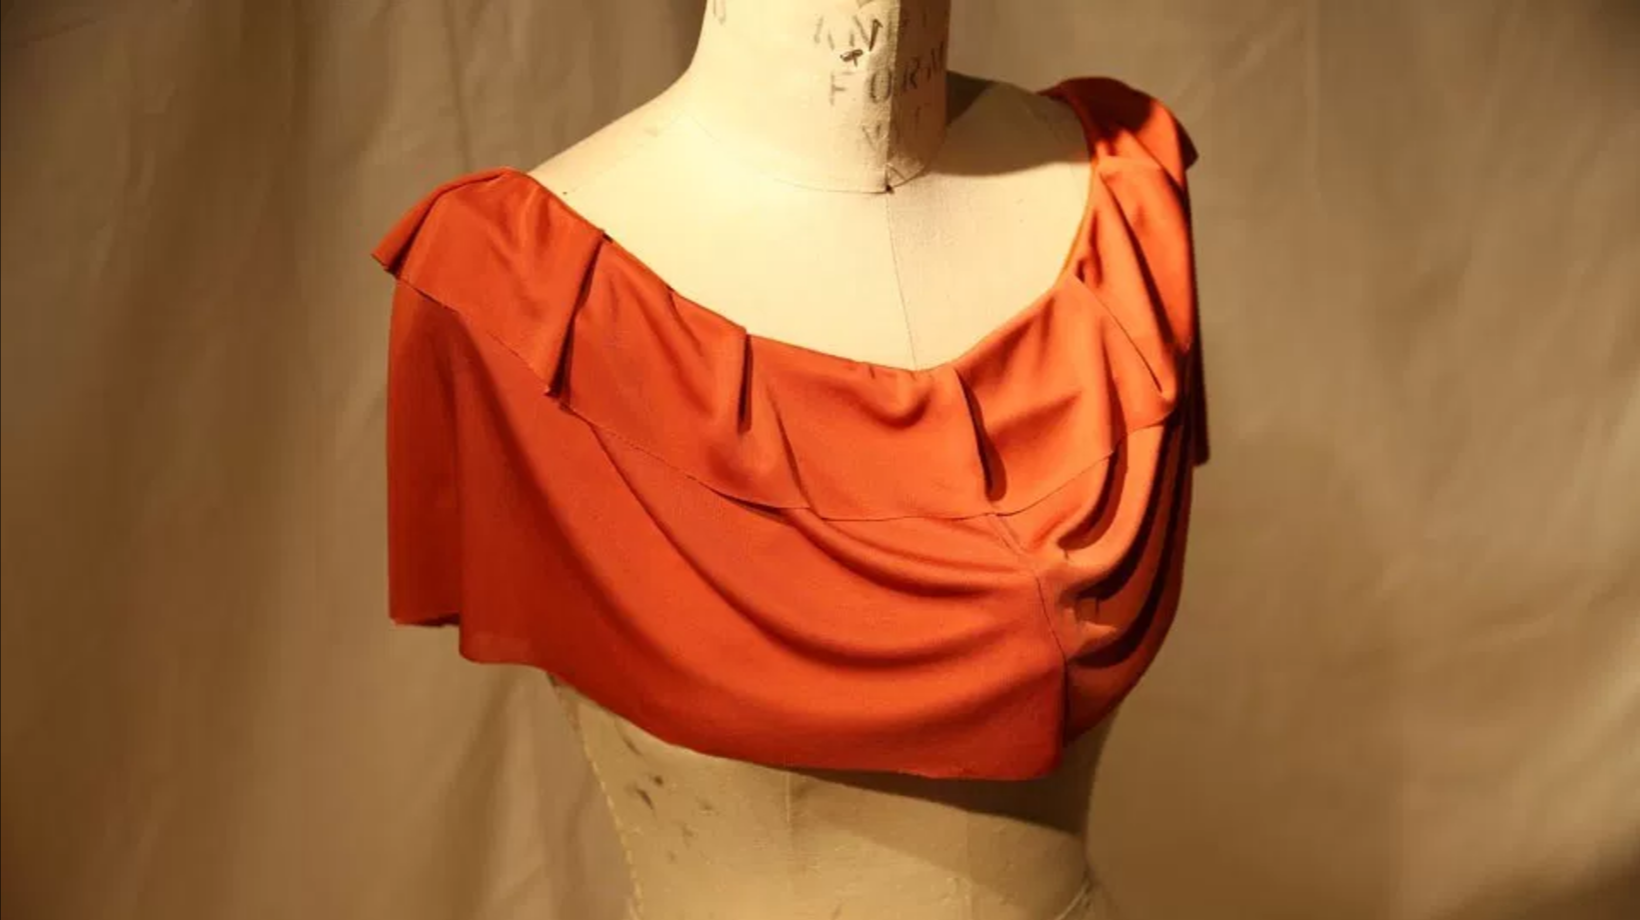 Photo of the front of the wearable piece. The orange ruffled shirt neck is placed on a mannequin. The fabric is deformed on the front where the biting denture toy is placed underneath it.